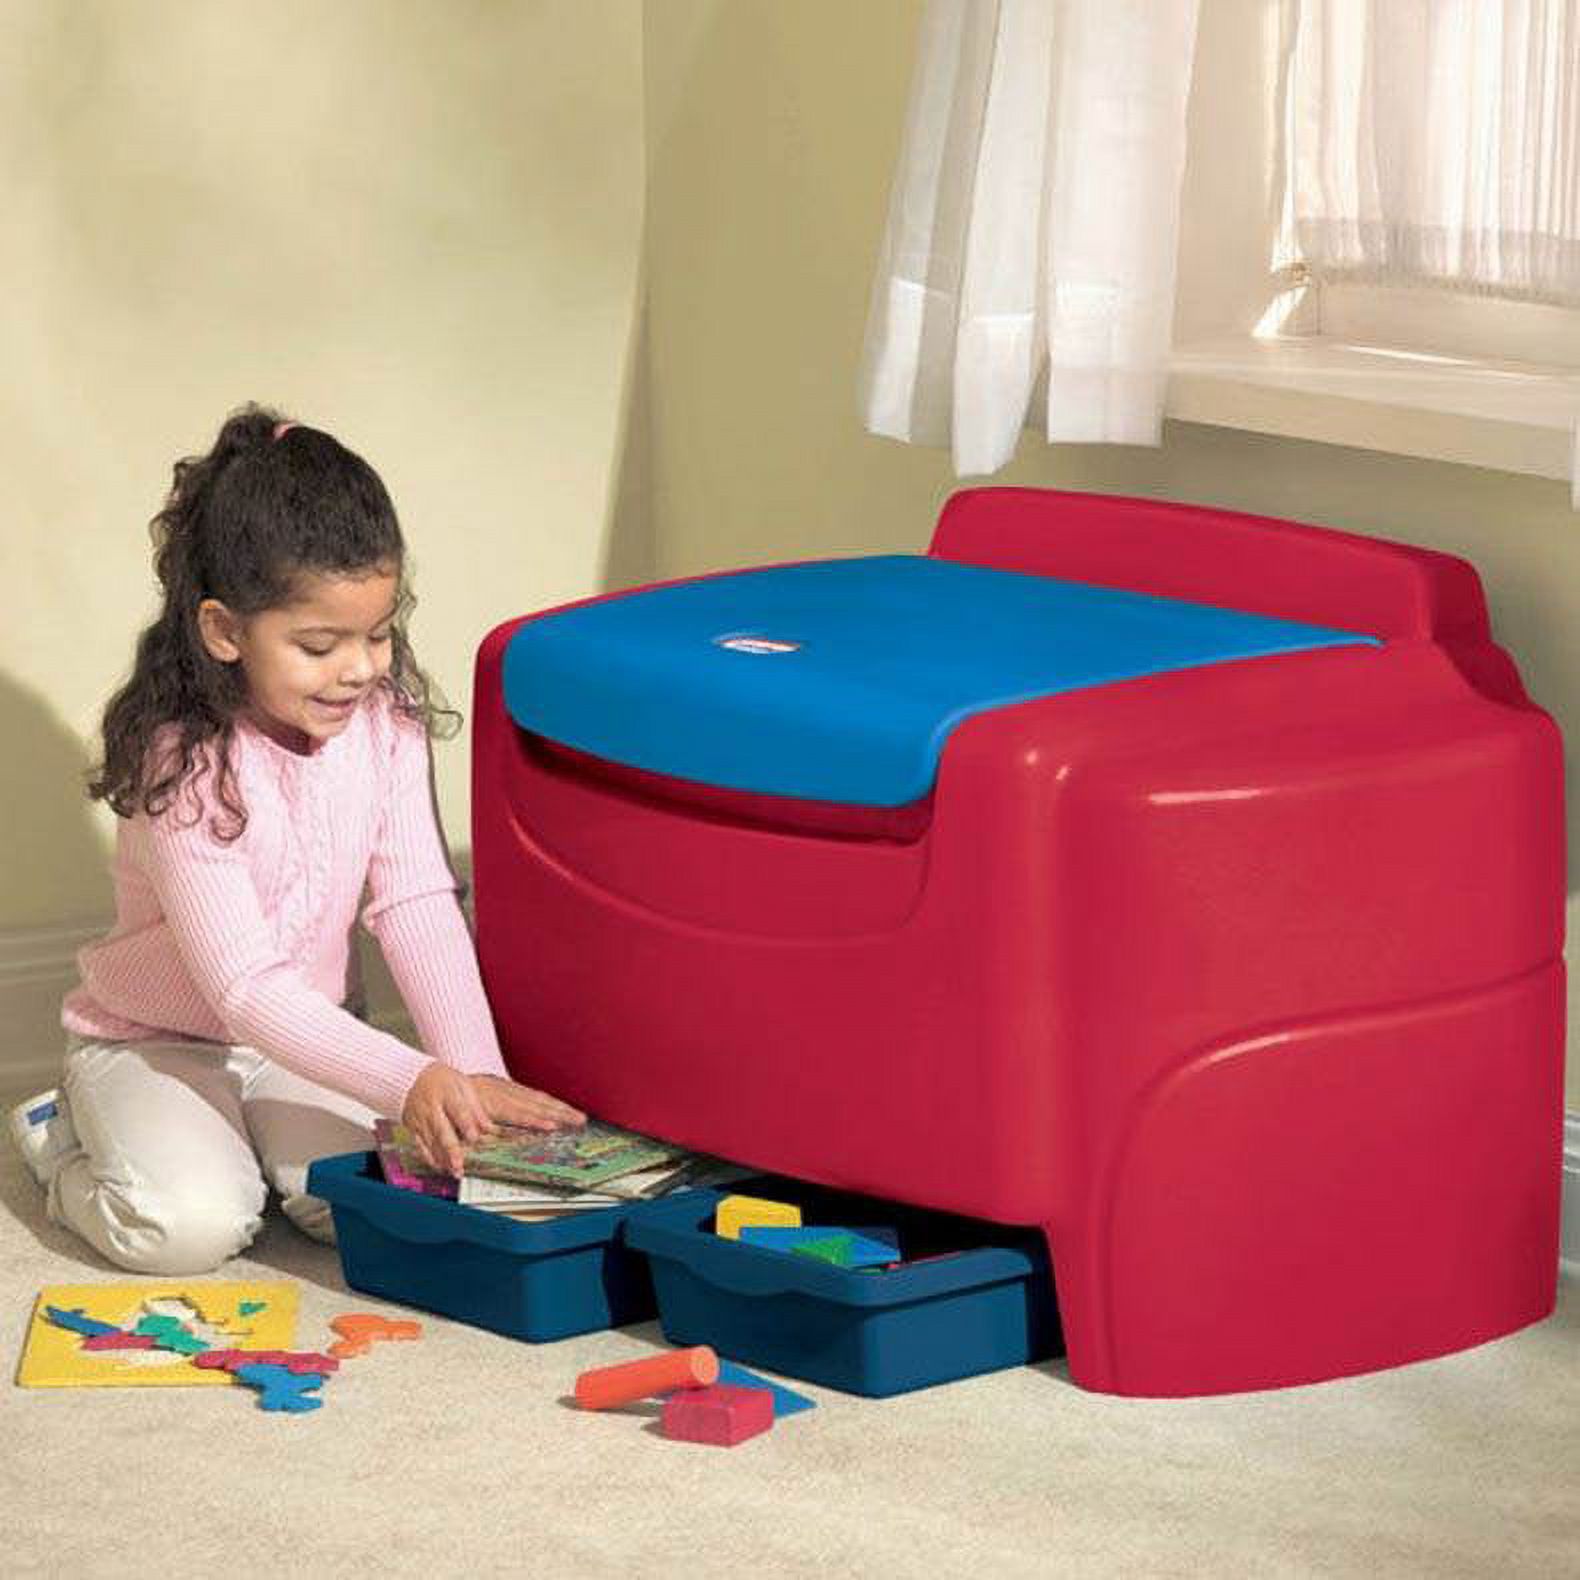 Little Tikes Sort 'n Store Toy Chest and Drawers - Primary Colors | 606540P - image 3 of 3